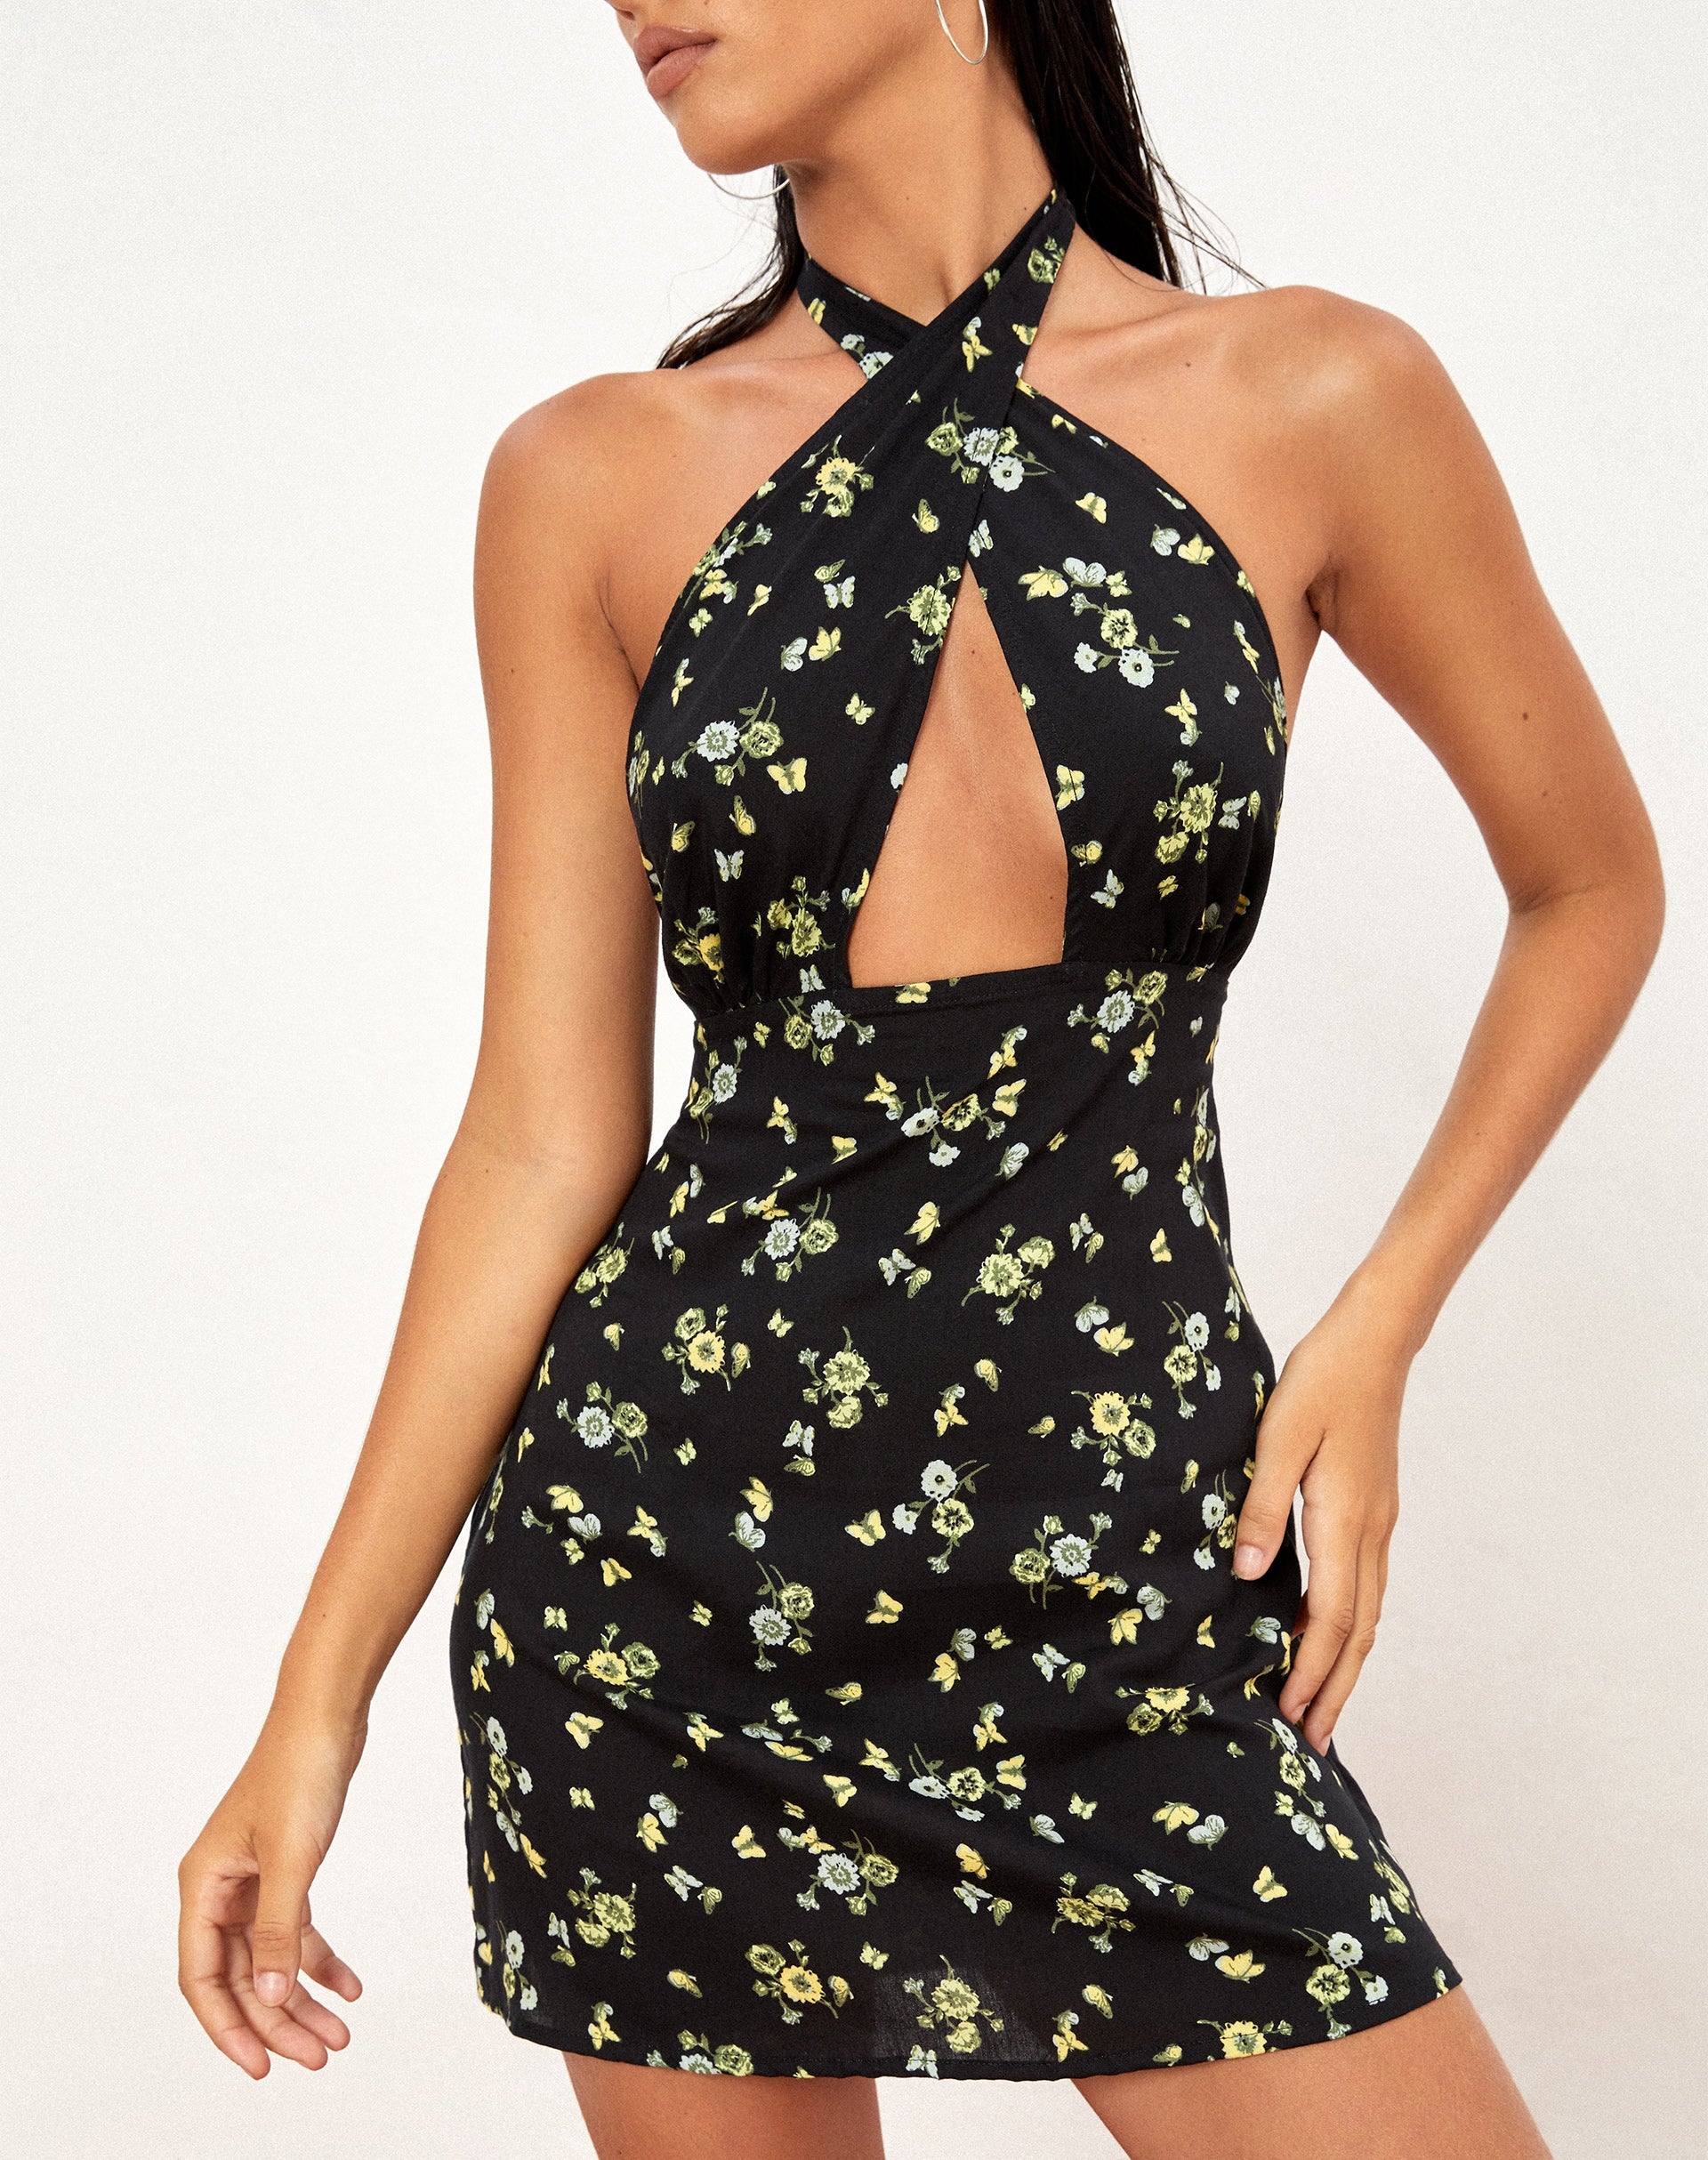 image of Moura Cutout Dress in Lemon and Lime Black